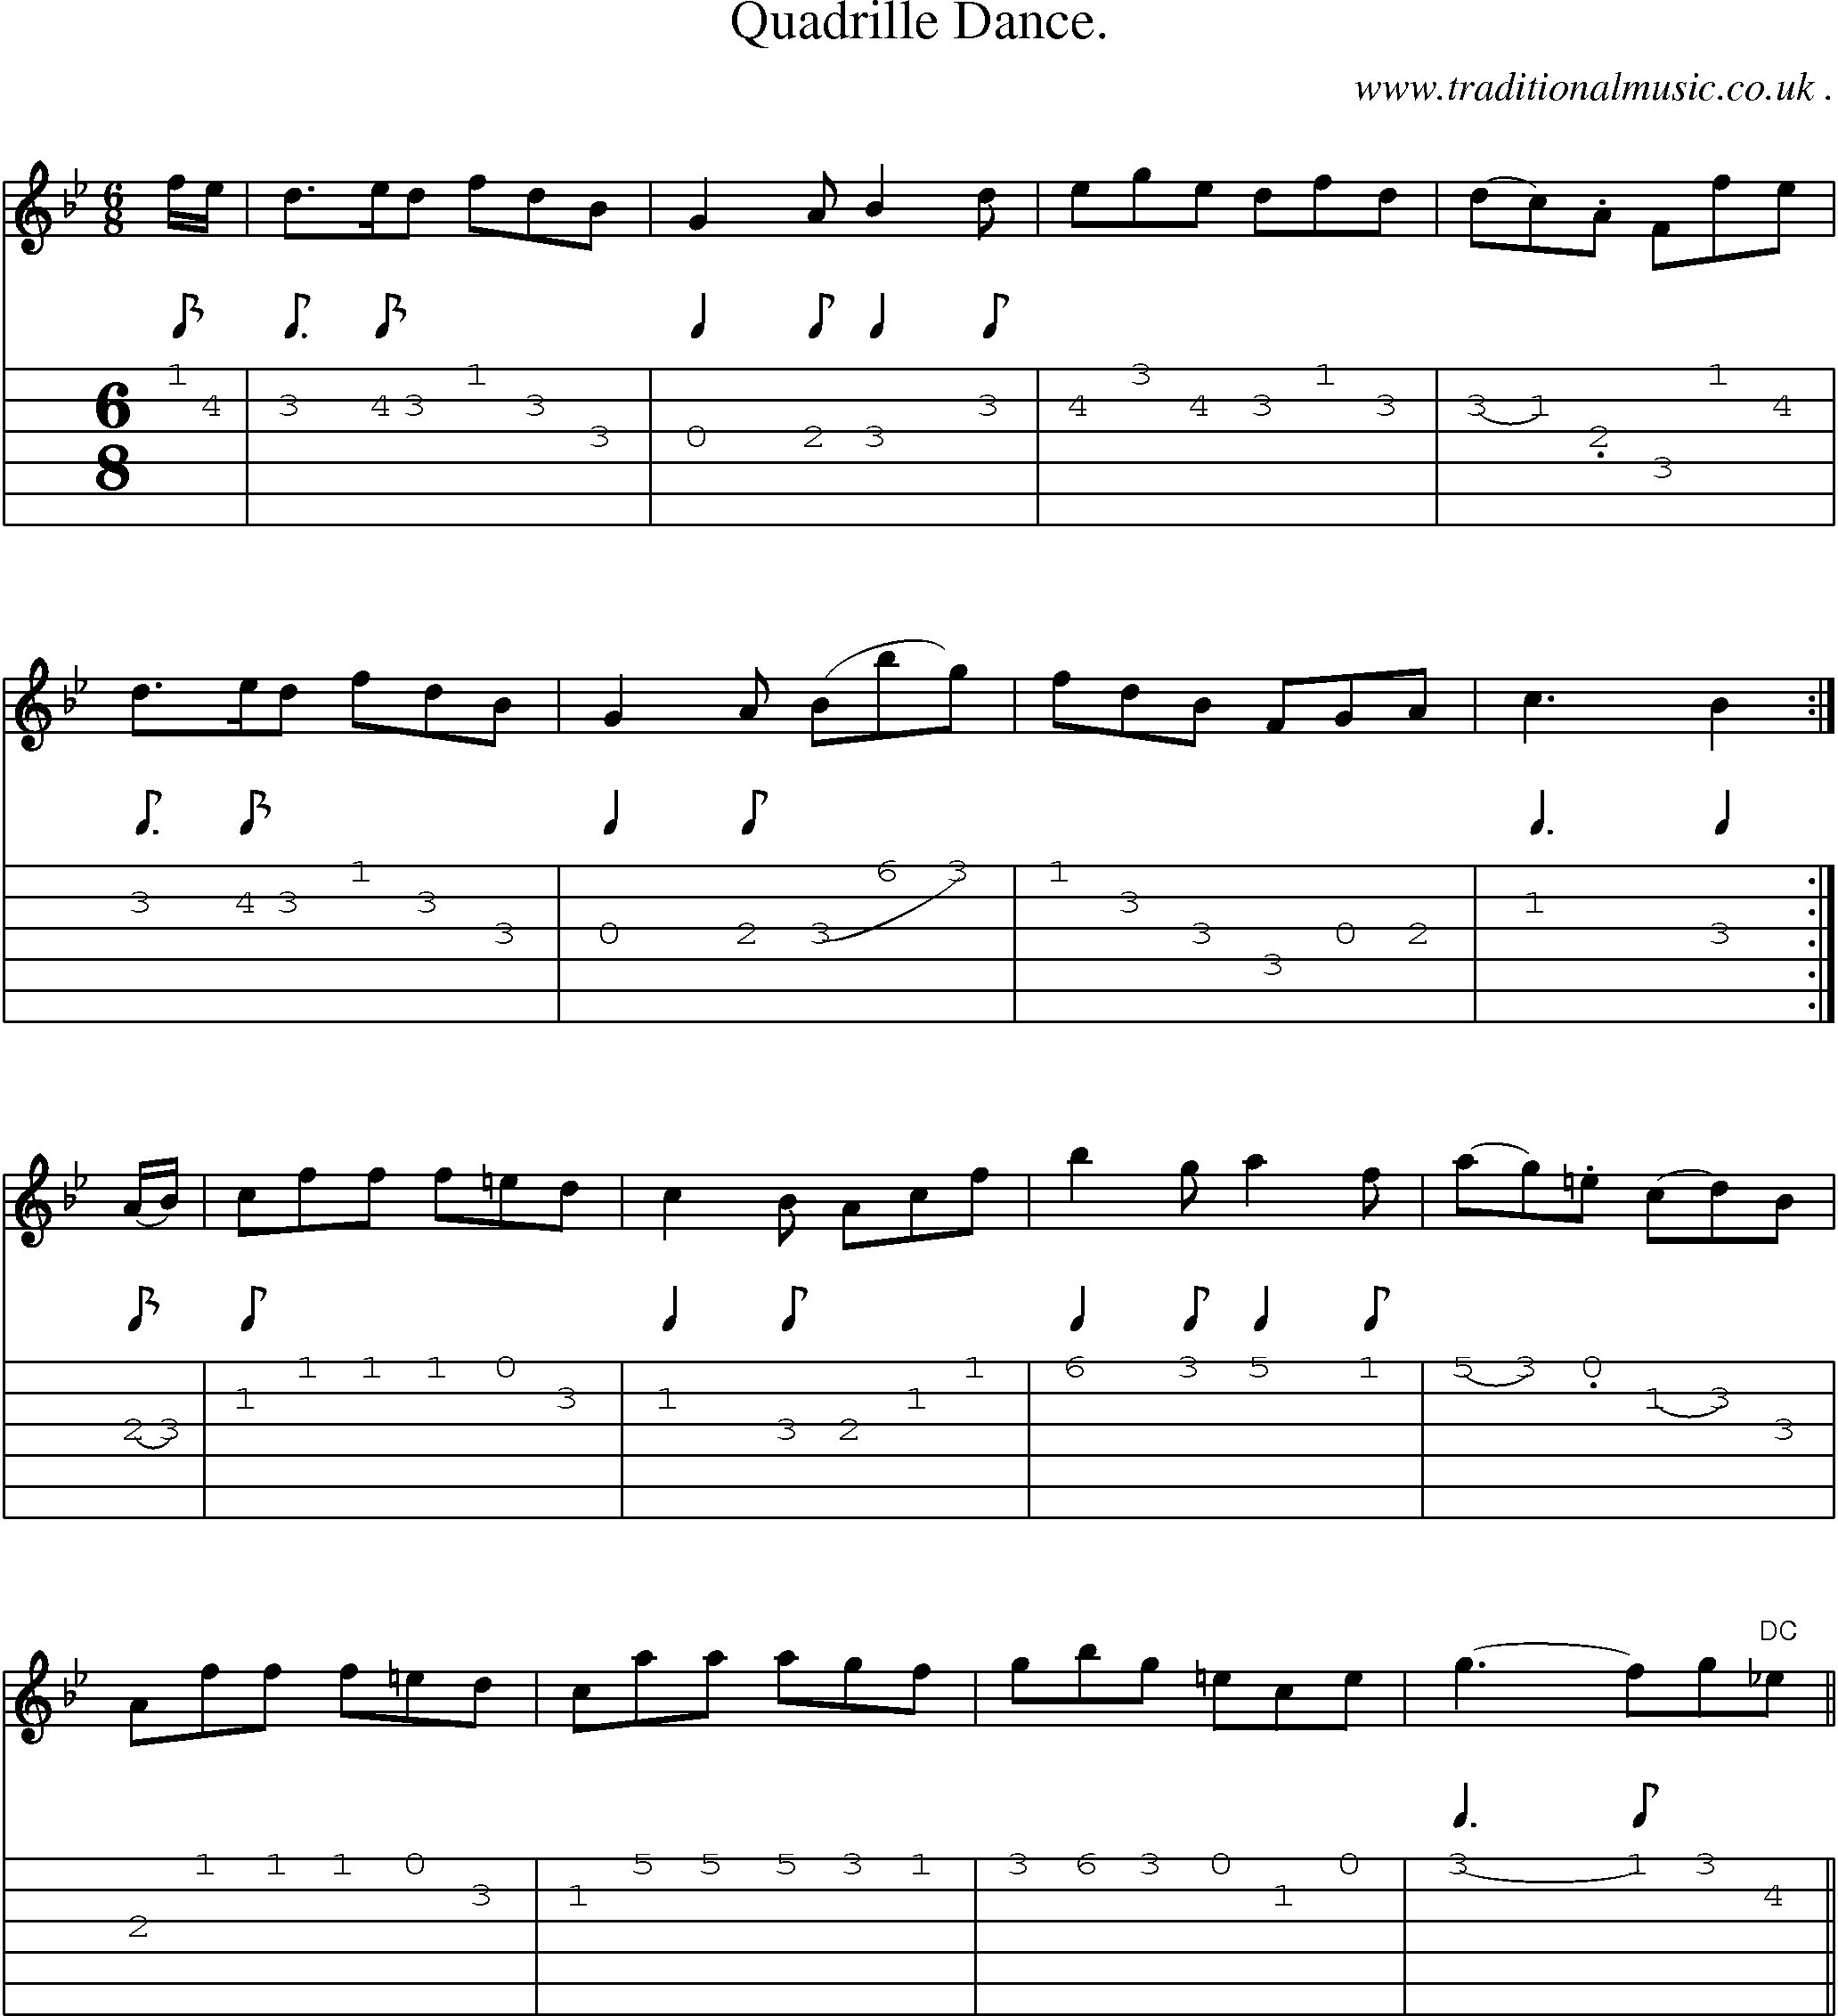 Sheet-Music and Guitar Tabs for Quadrille Dance